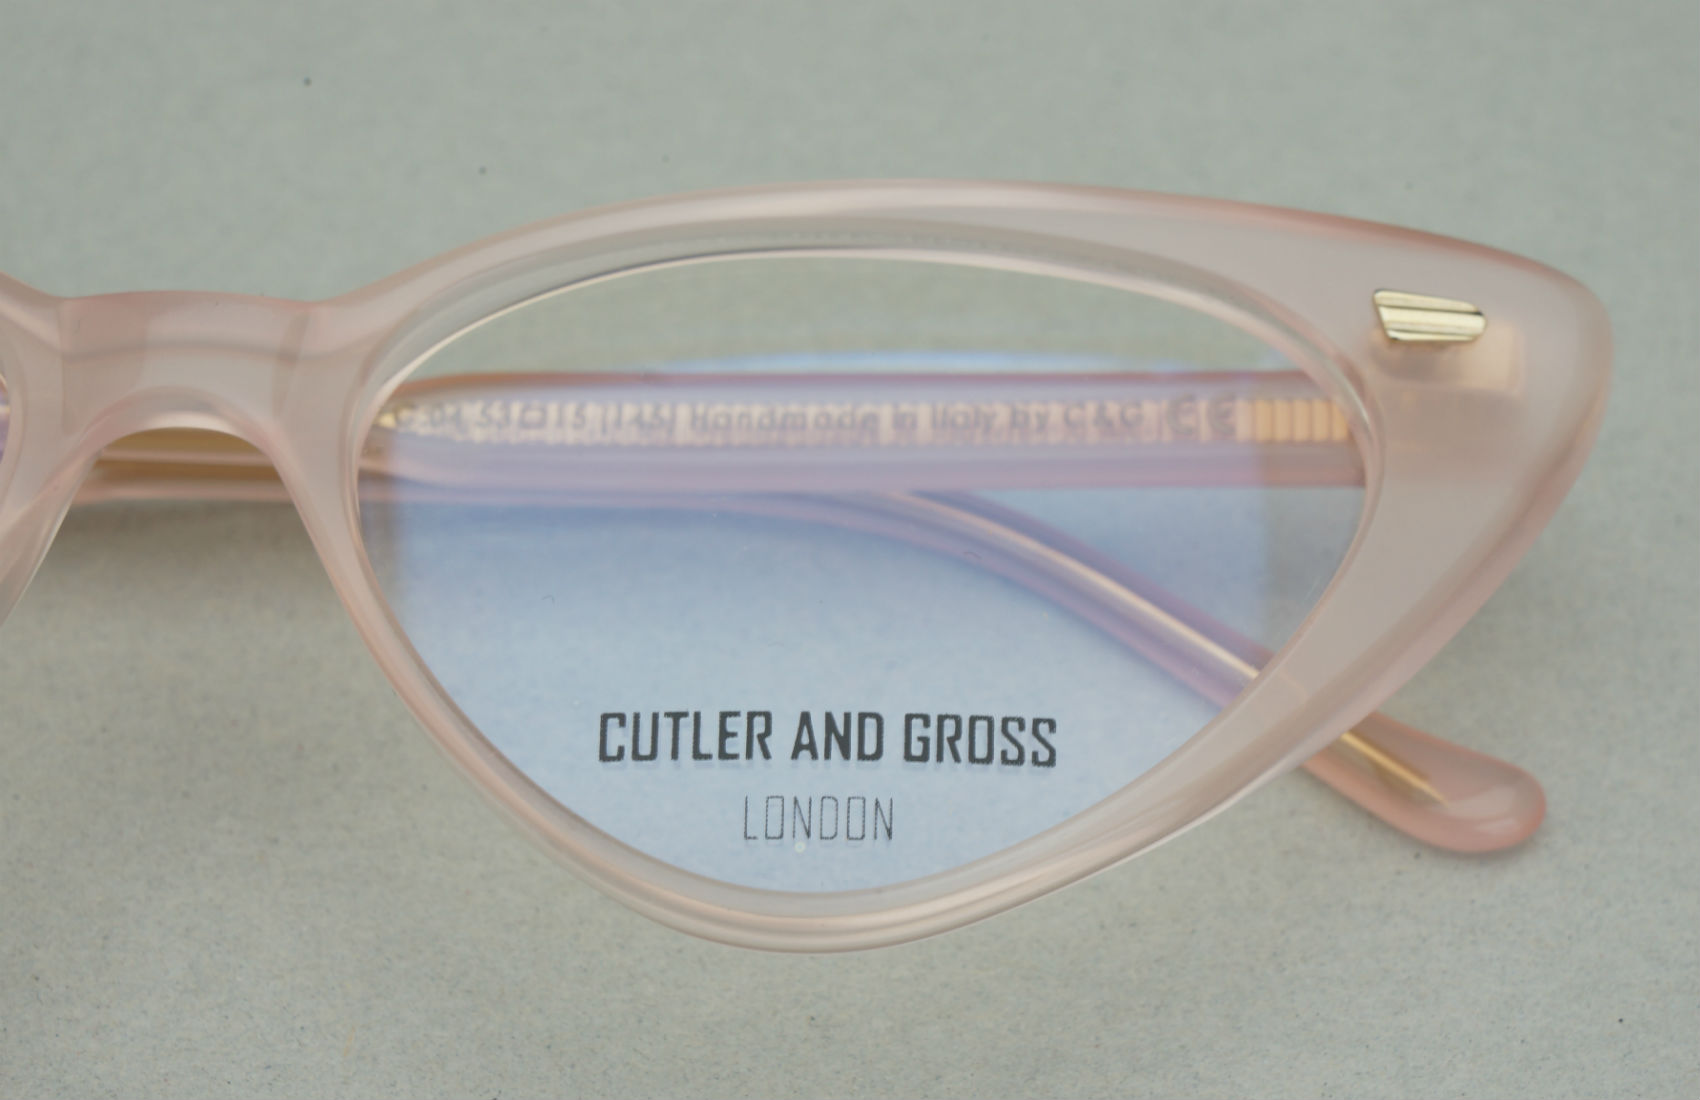 CUTLER AND GROSS 2019 S/S